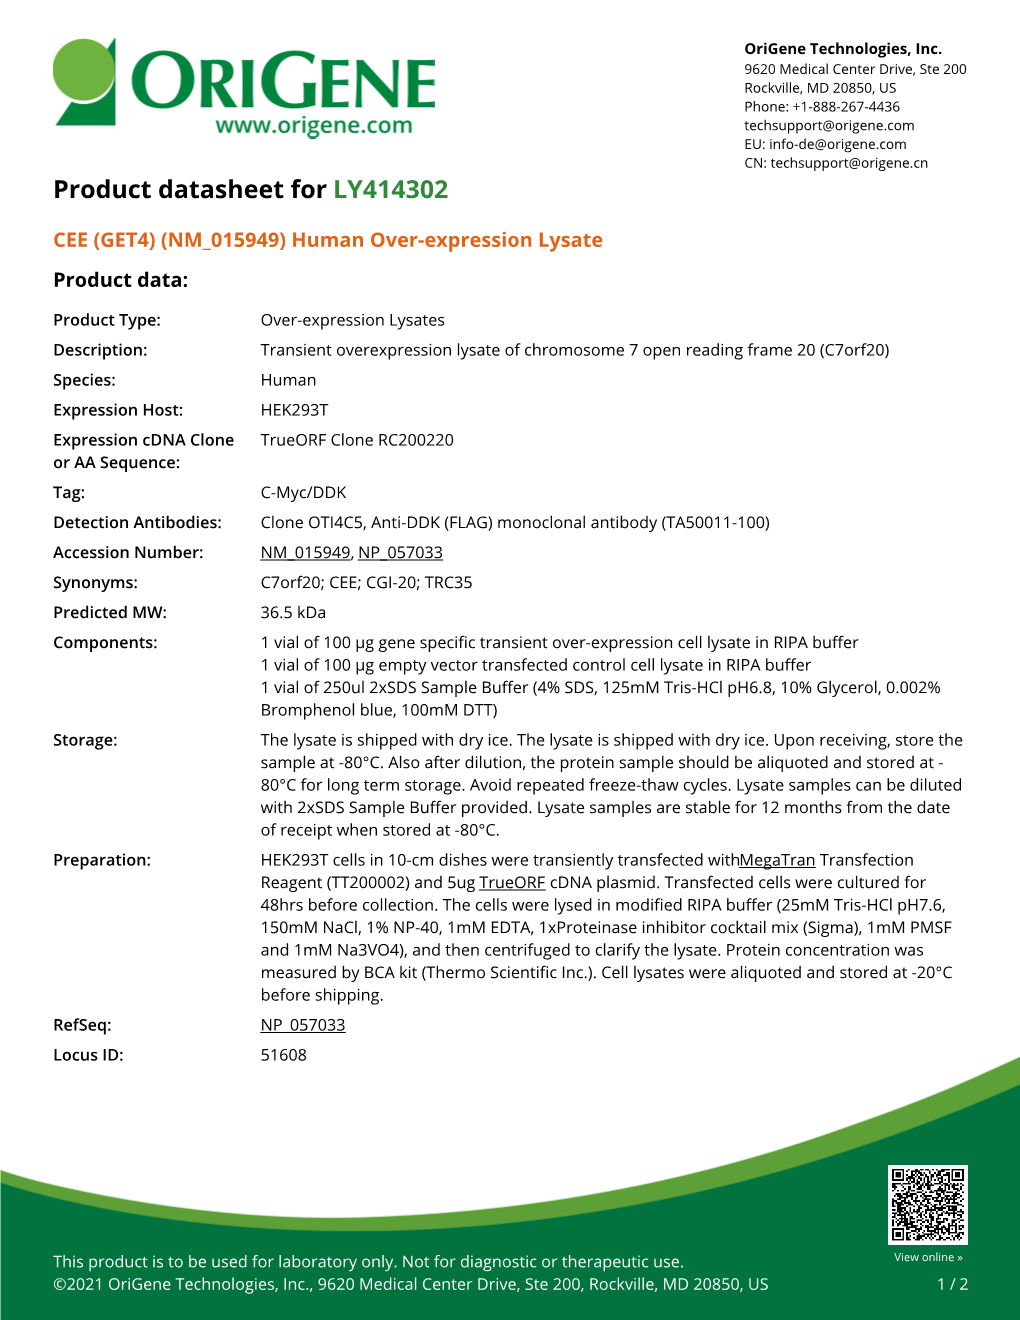 CEE (GET4) (NM 015949) Human Over-Expression Lysate Product Data